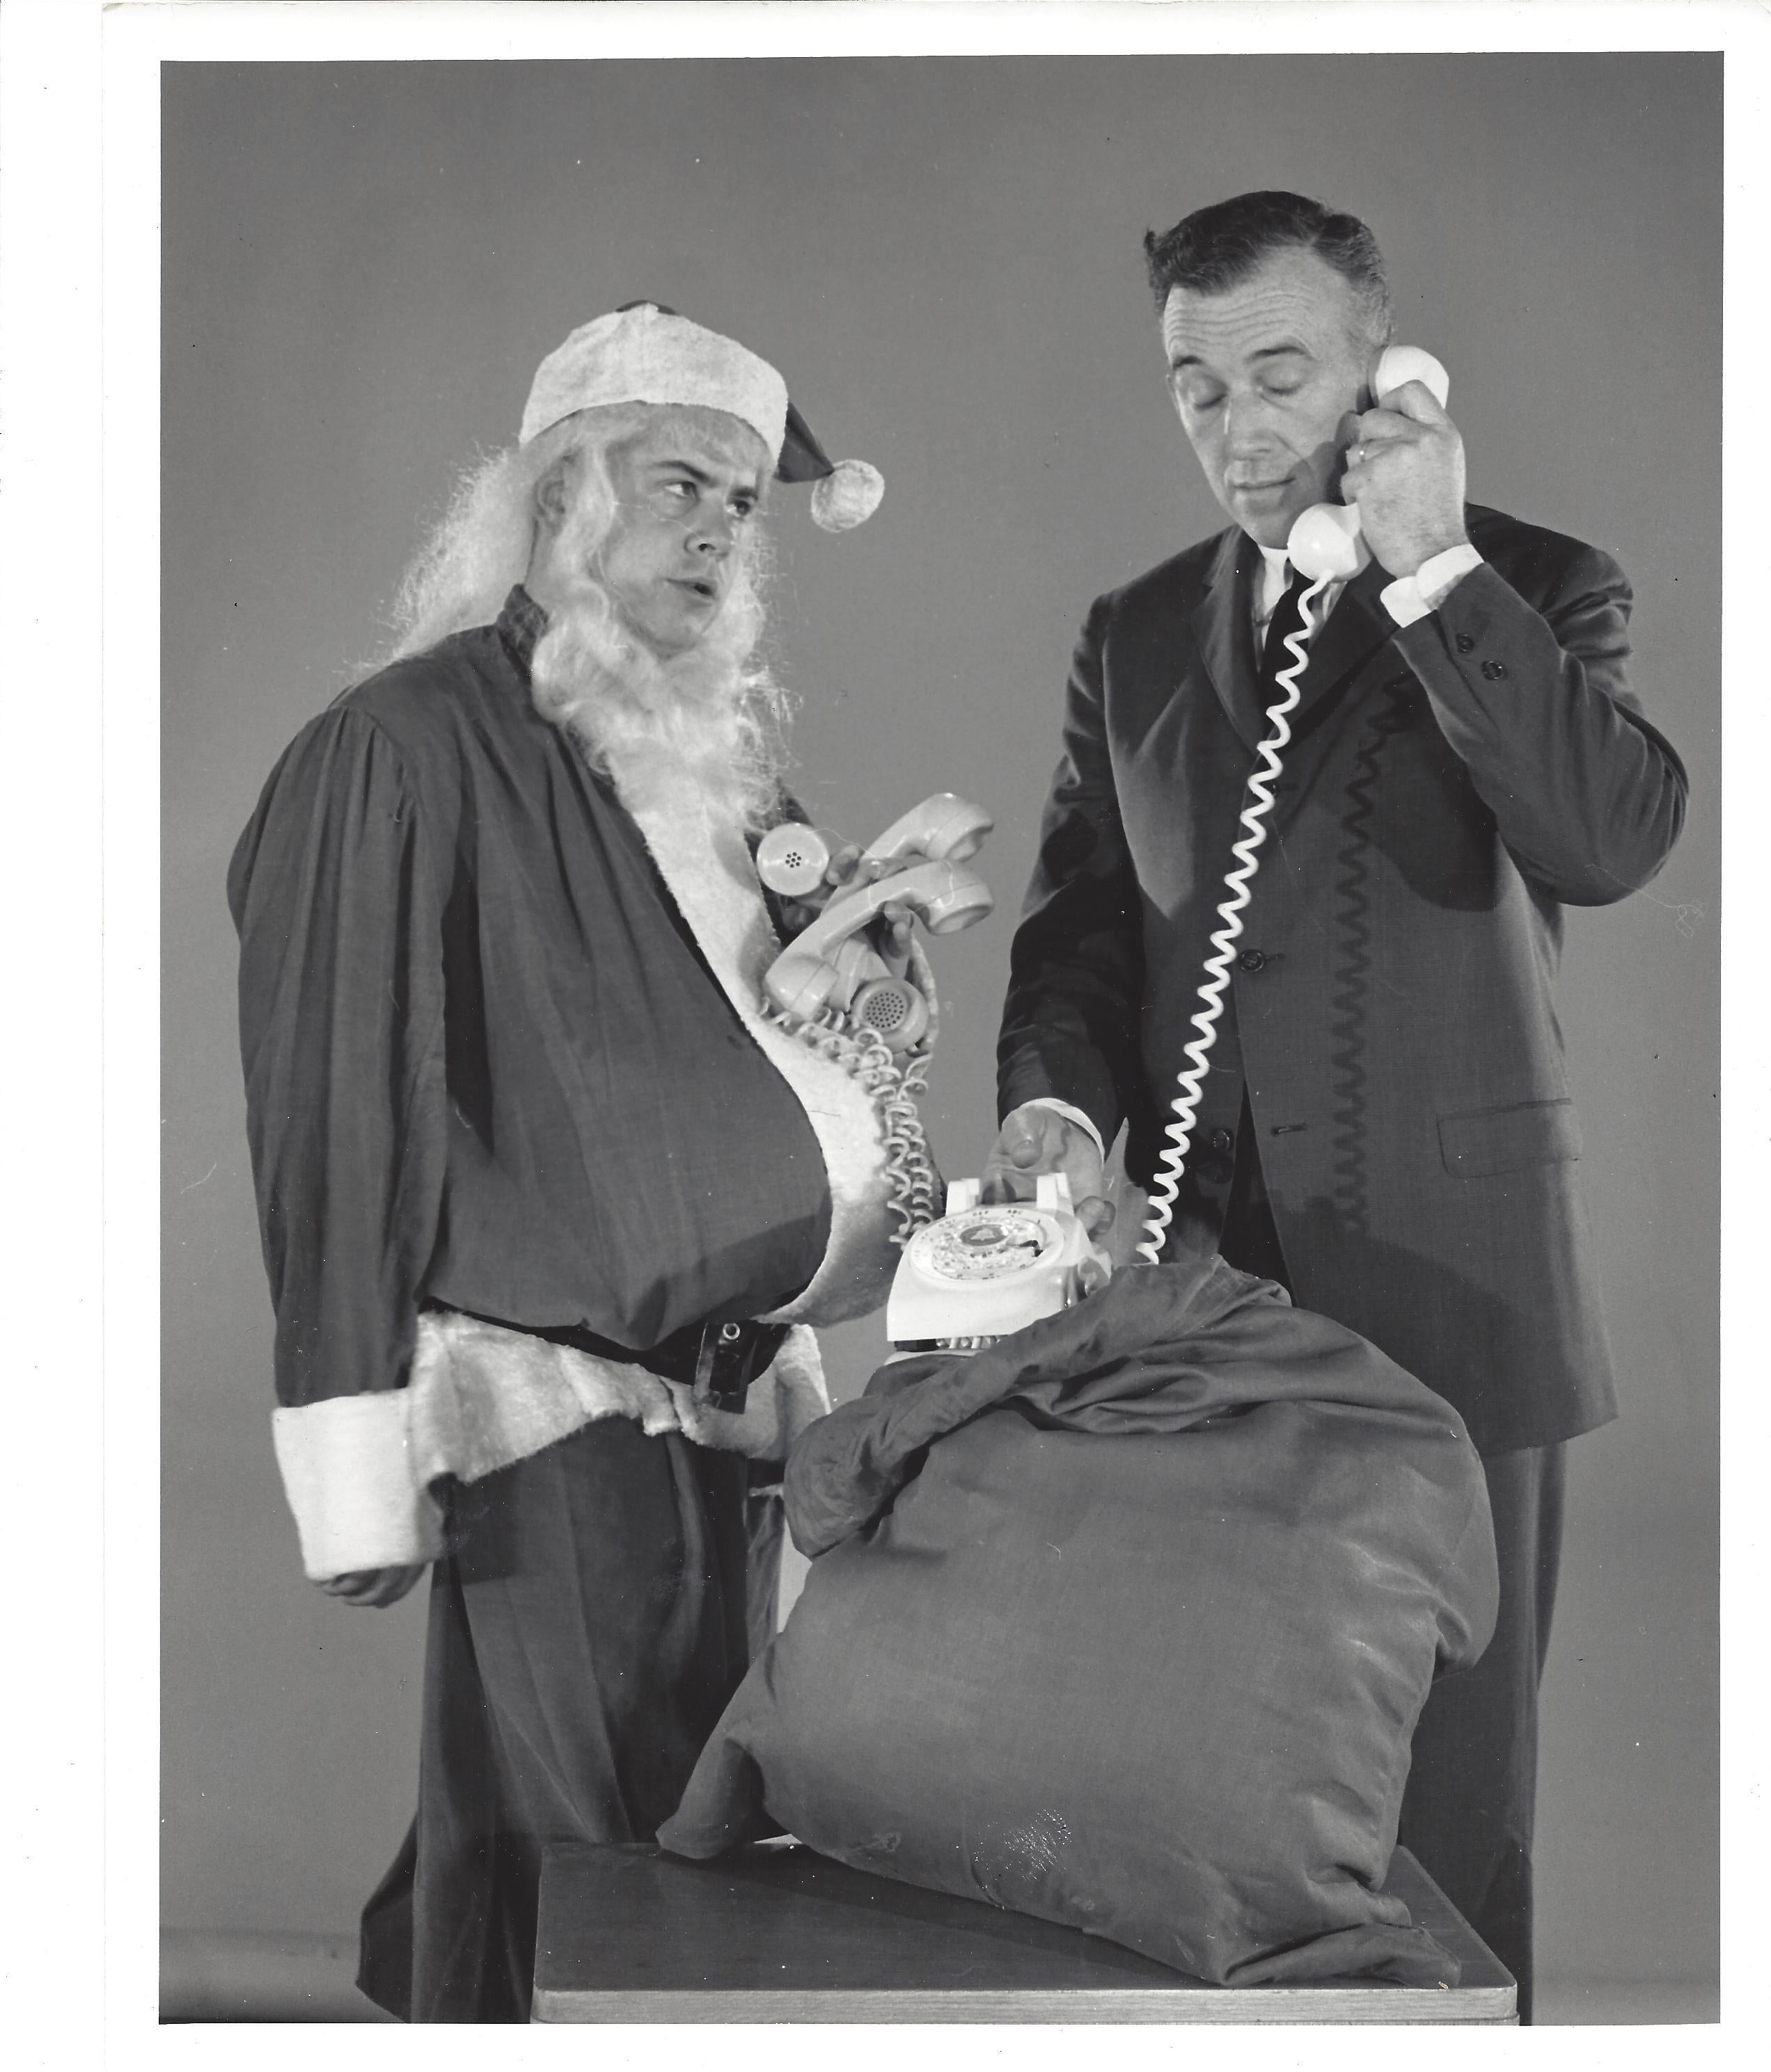 Tim Conway (as Santa) and Ernie Anderson in a 1960 TV commercial for the Ohio Bell Telephone Company.